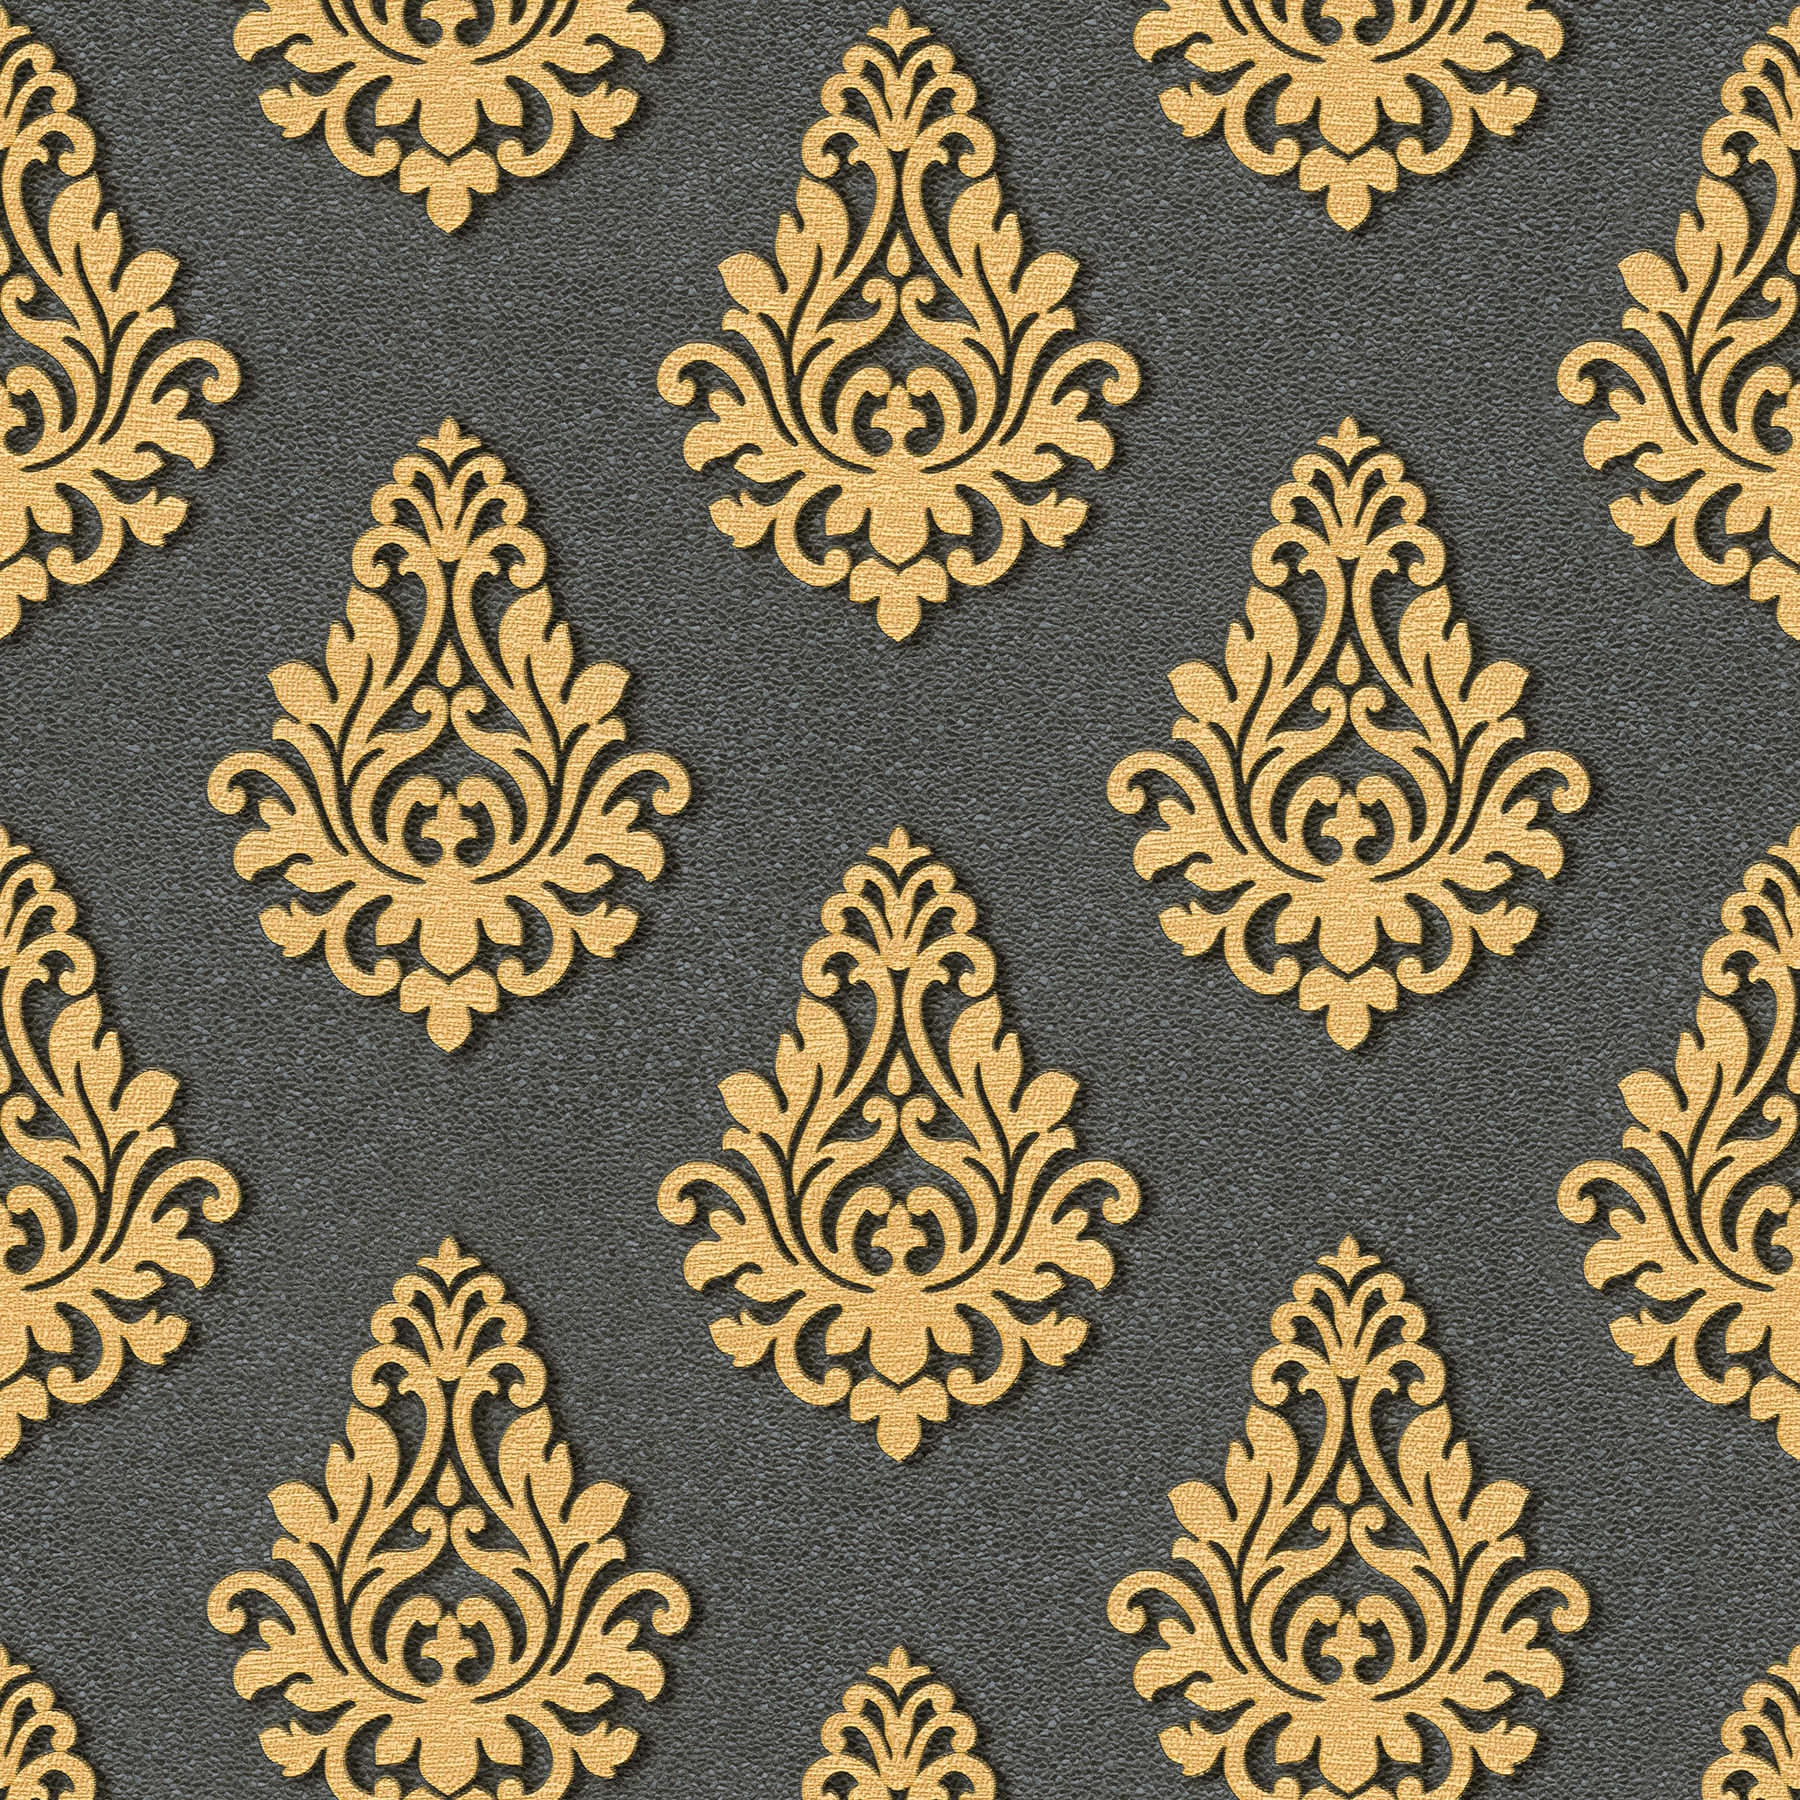 Ornamental wallpaper with metallic colours & texture effect - gold, black
